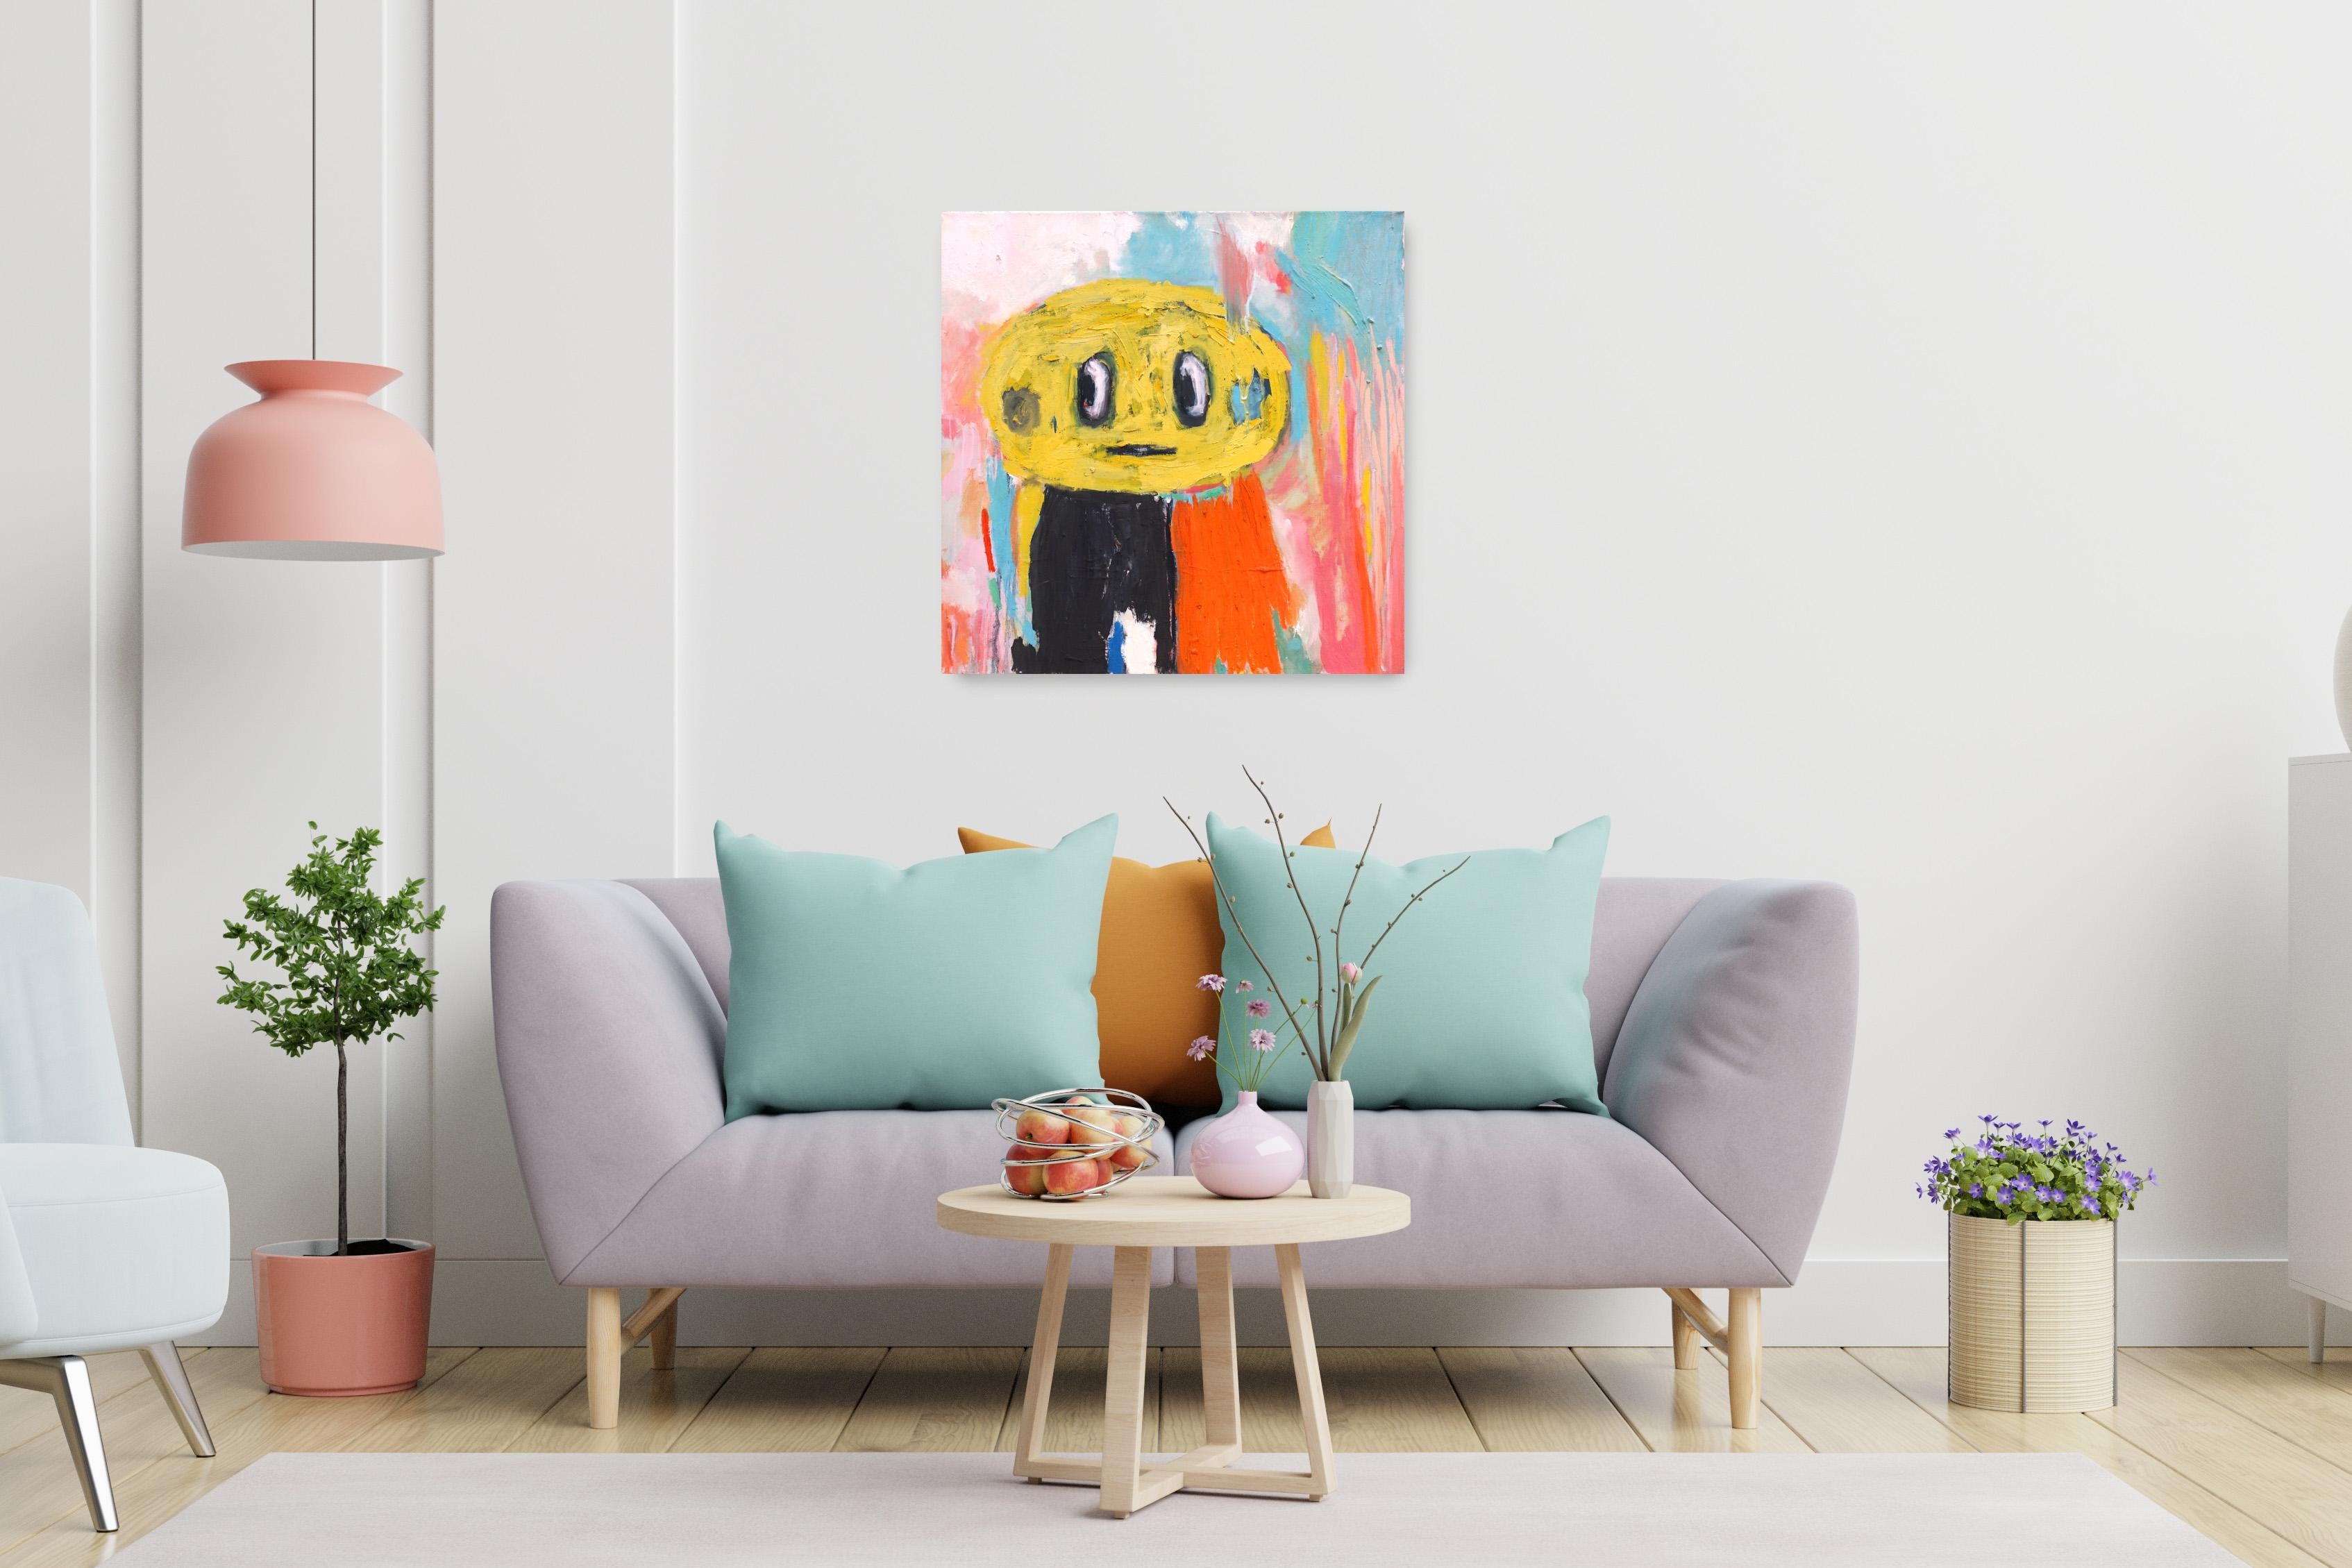 Yellow Abstract Face, Squared Oil Painting on Canvas, Smilie Portrait Vivid Tone 2